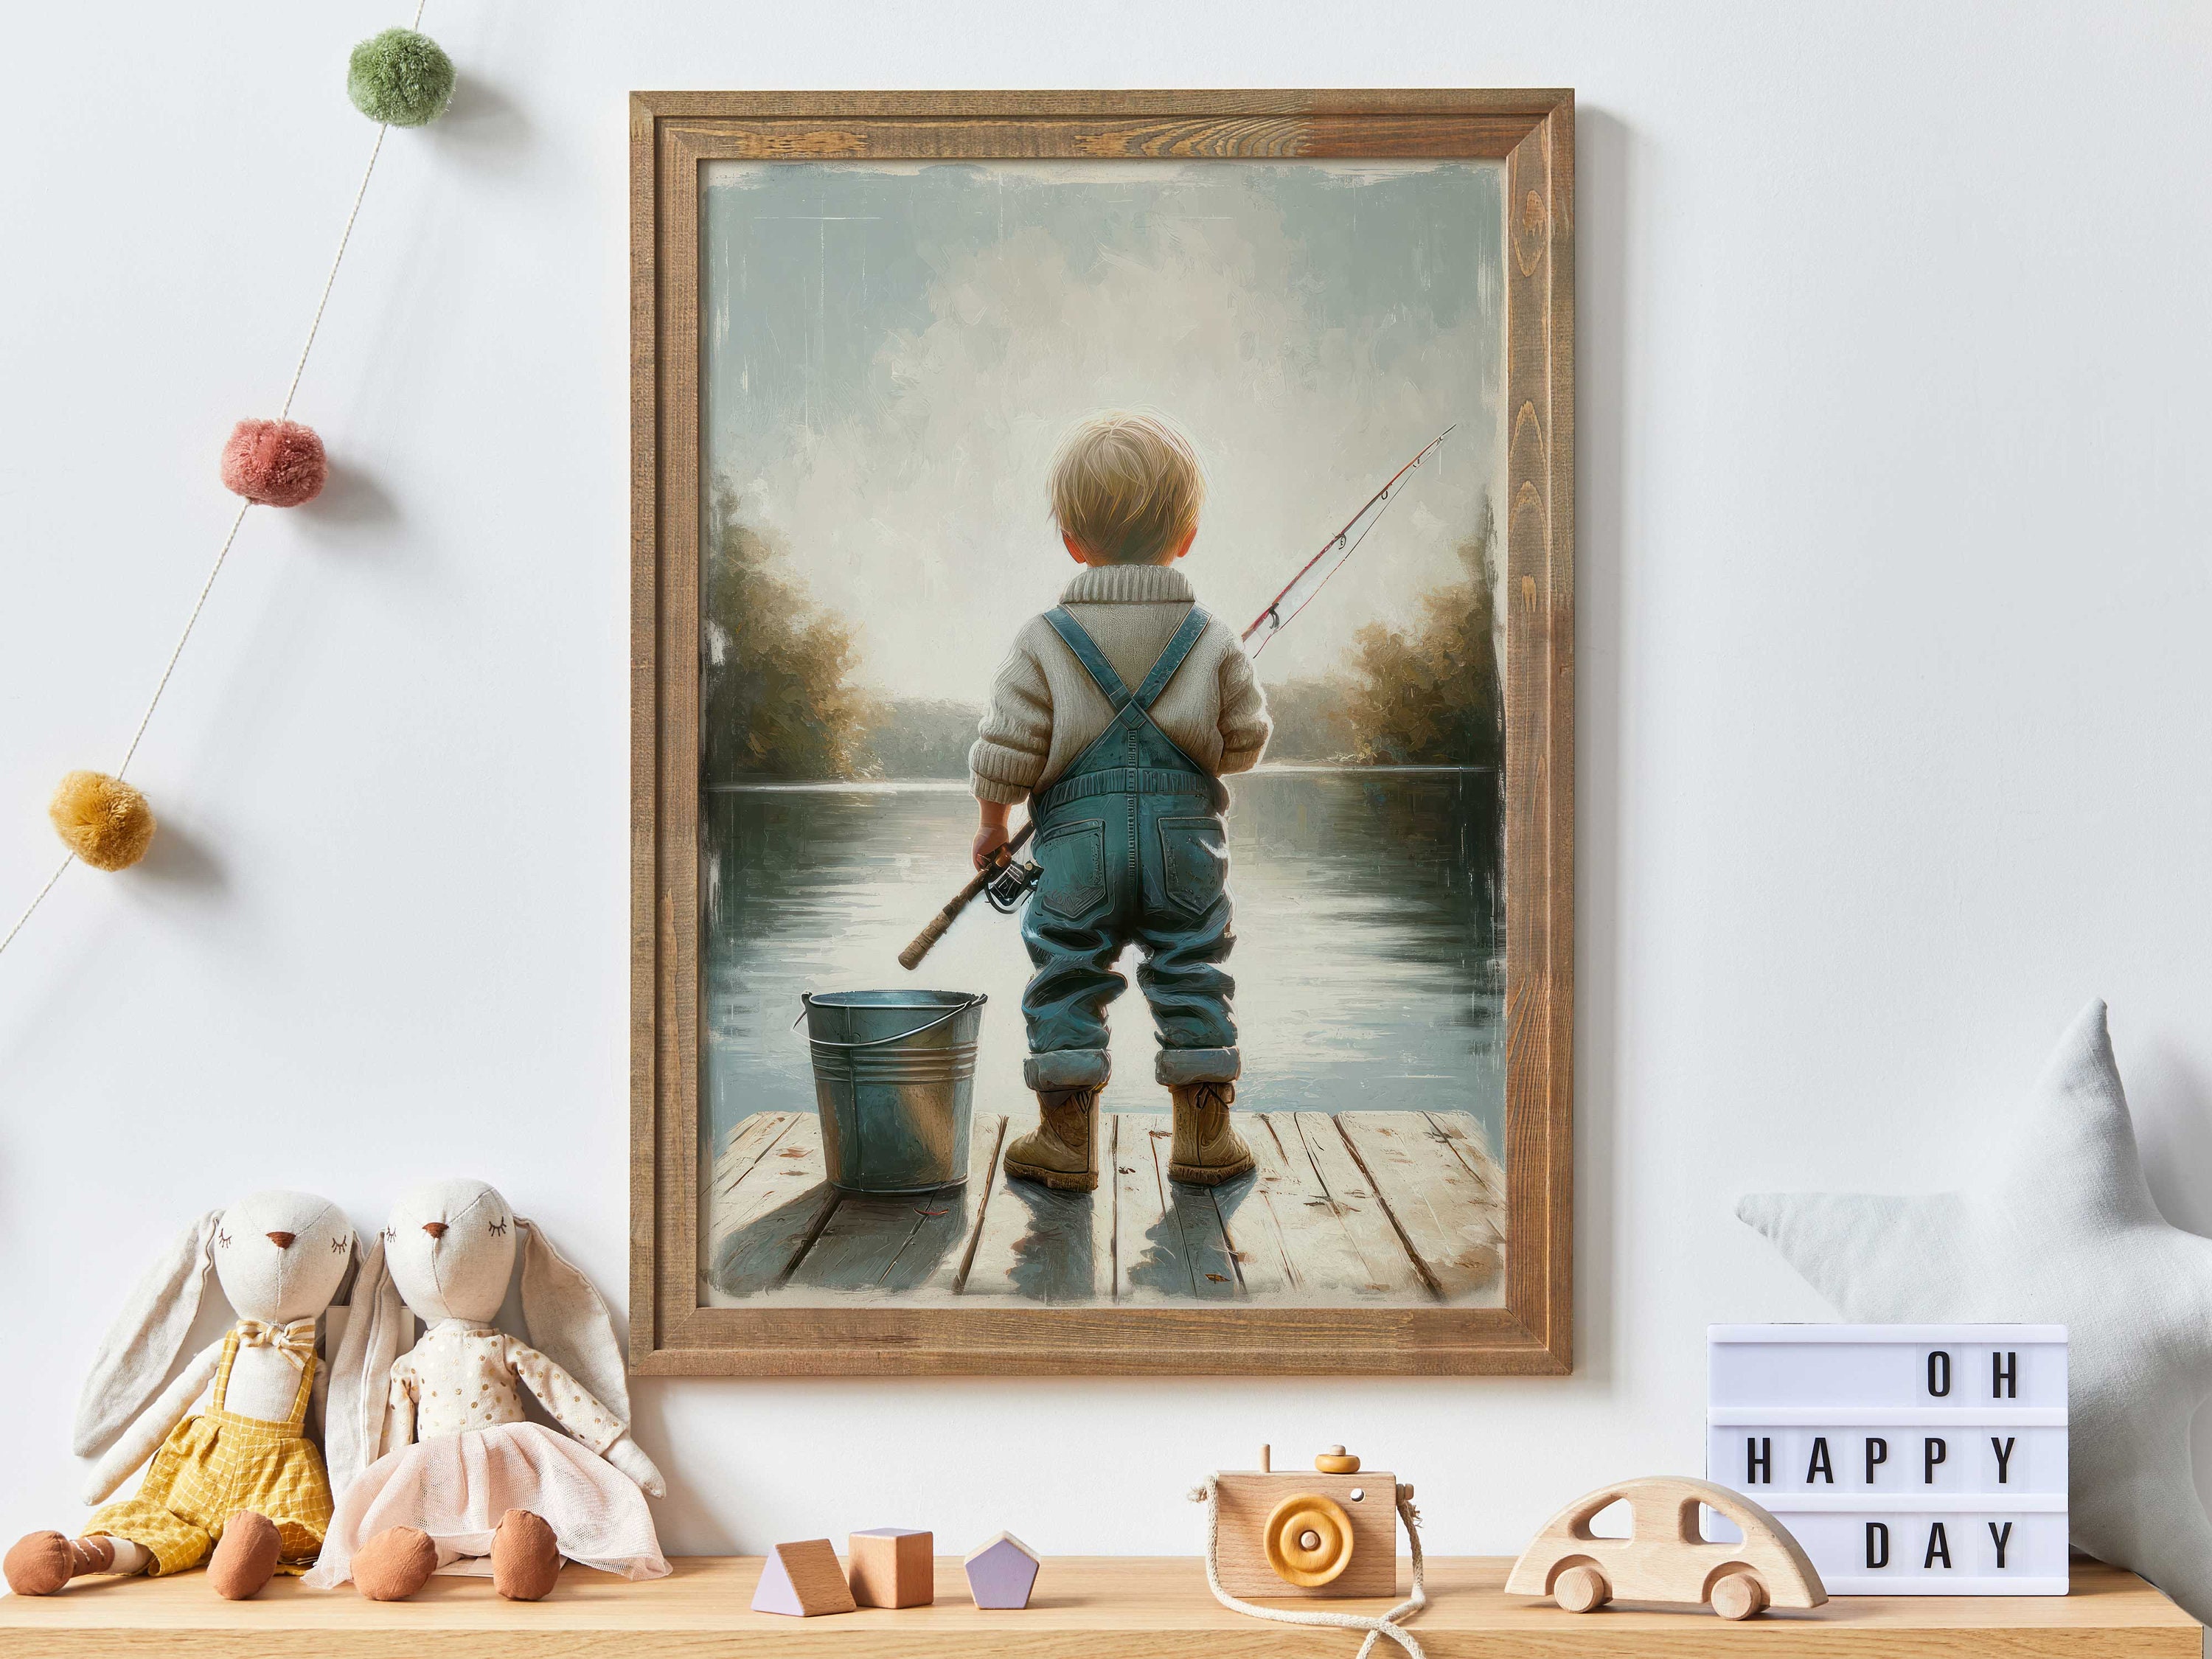 R.G. HOUGH YOUNG BOY RIVER FLY FISHING ORIGINAL OIL ON CANVAS LANDSCAPE  PAINTING